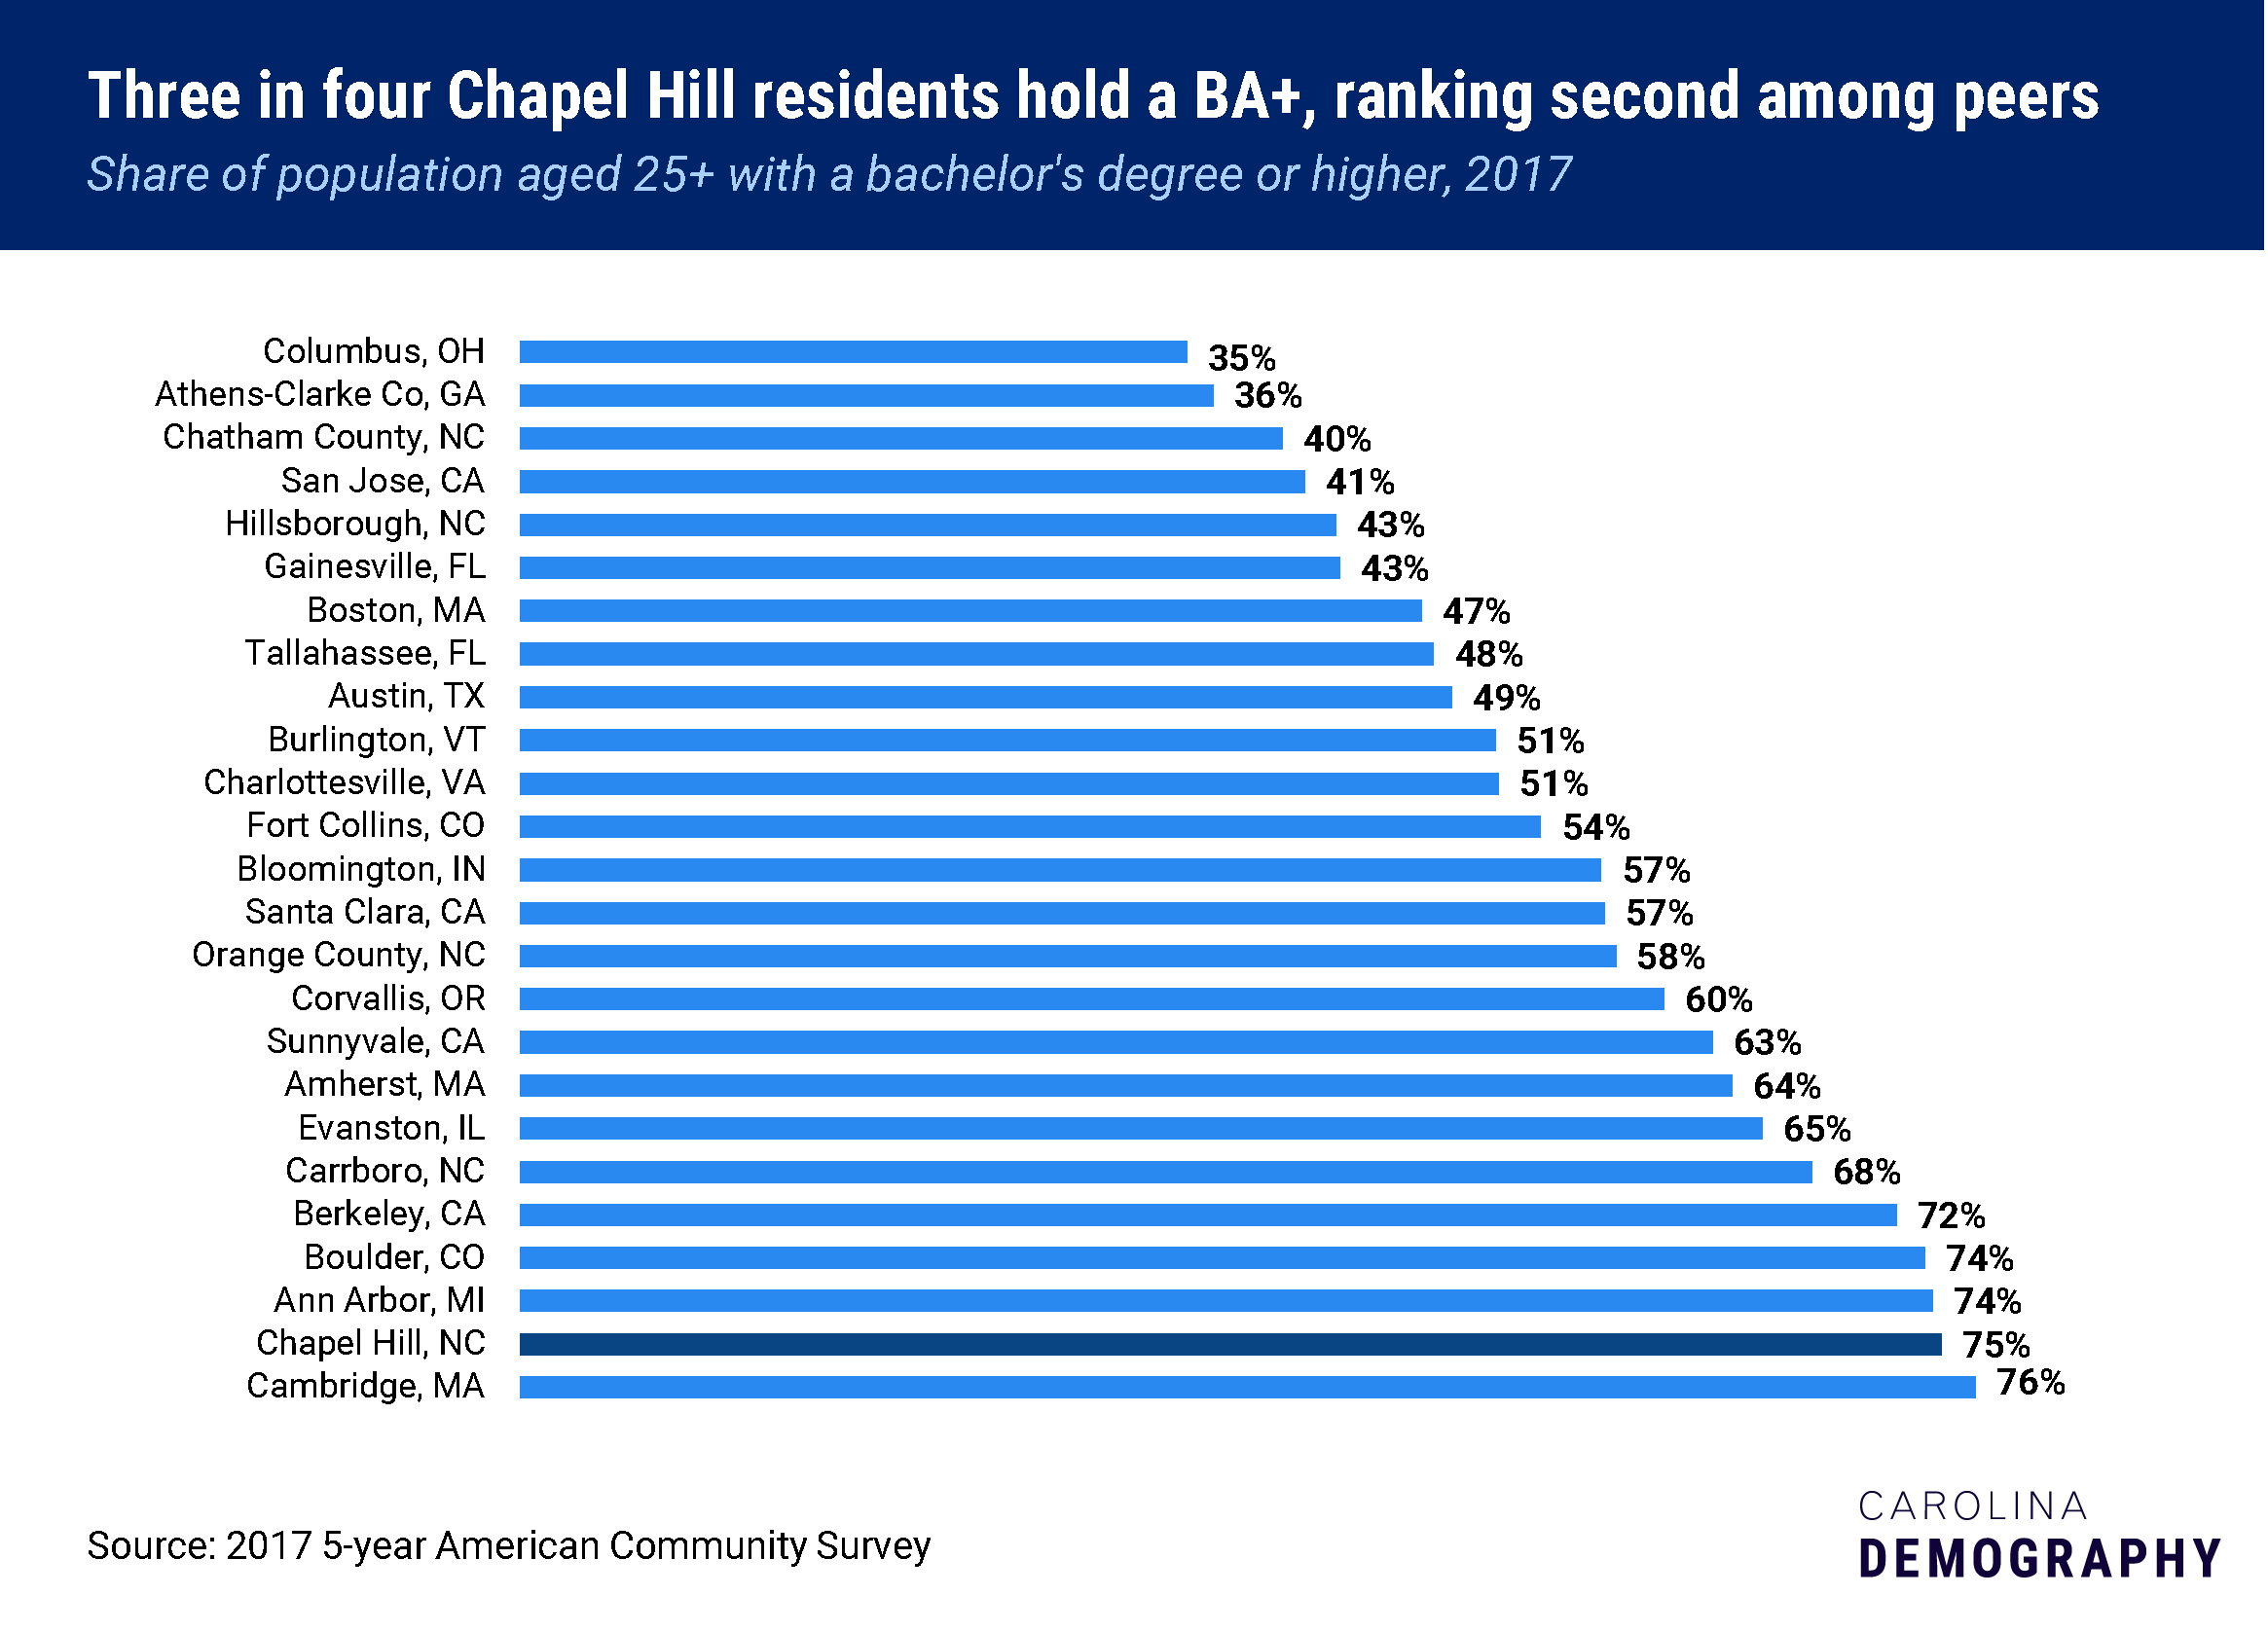 Three in four Chapel Hill residents hold a BA+, ranking second among peers, Share of population aged 25+ with a bachelor's degree or higher, 2017